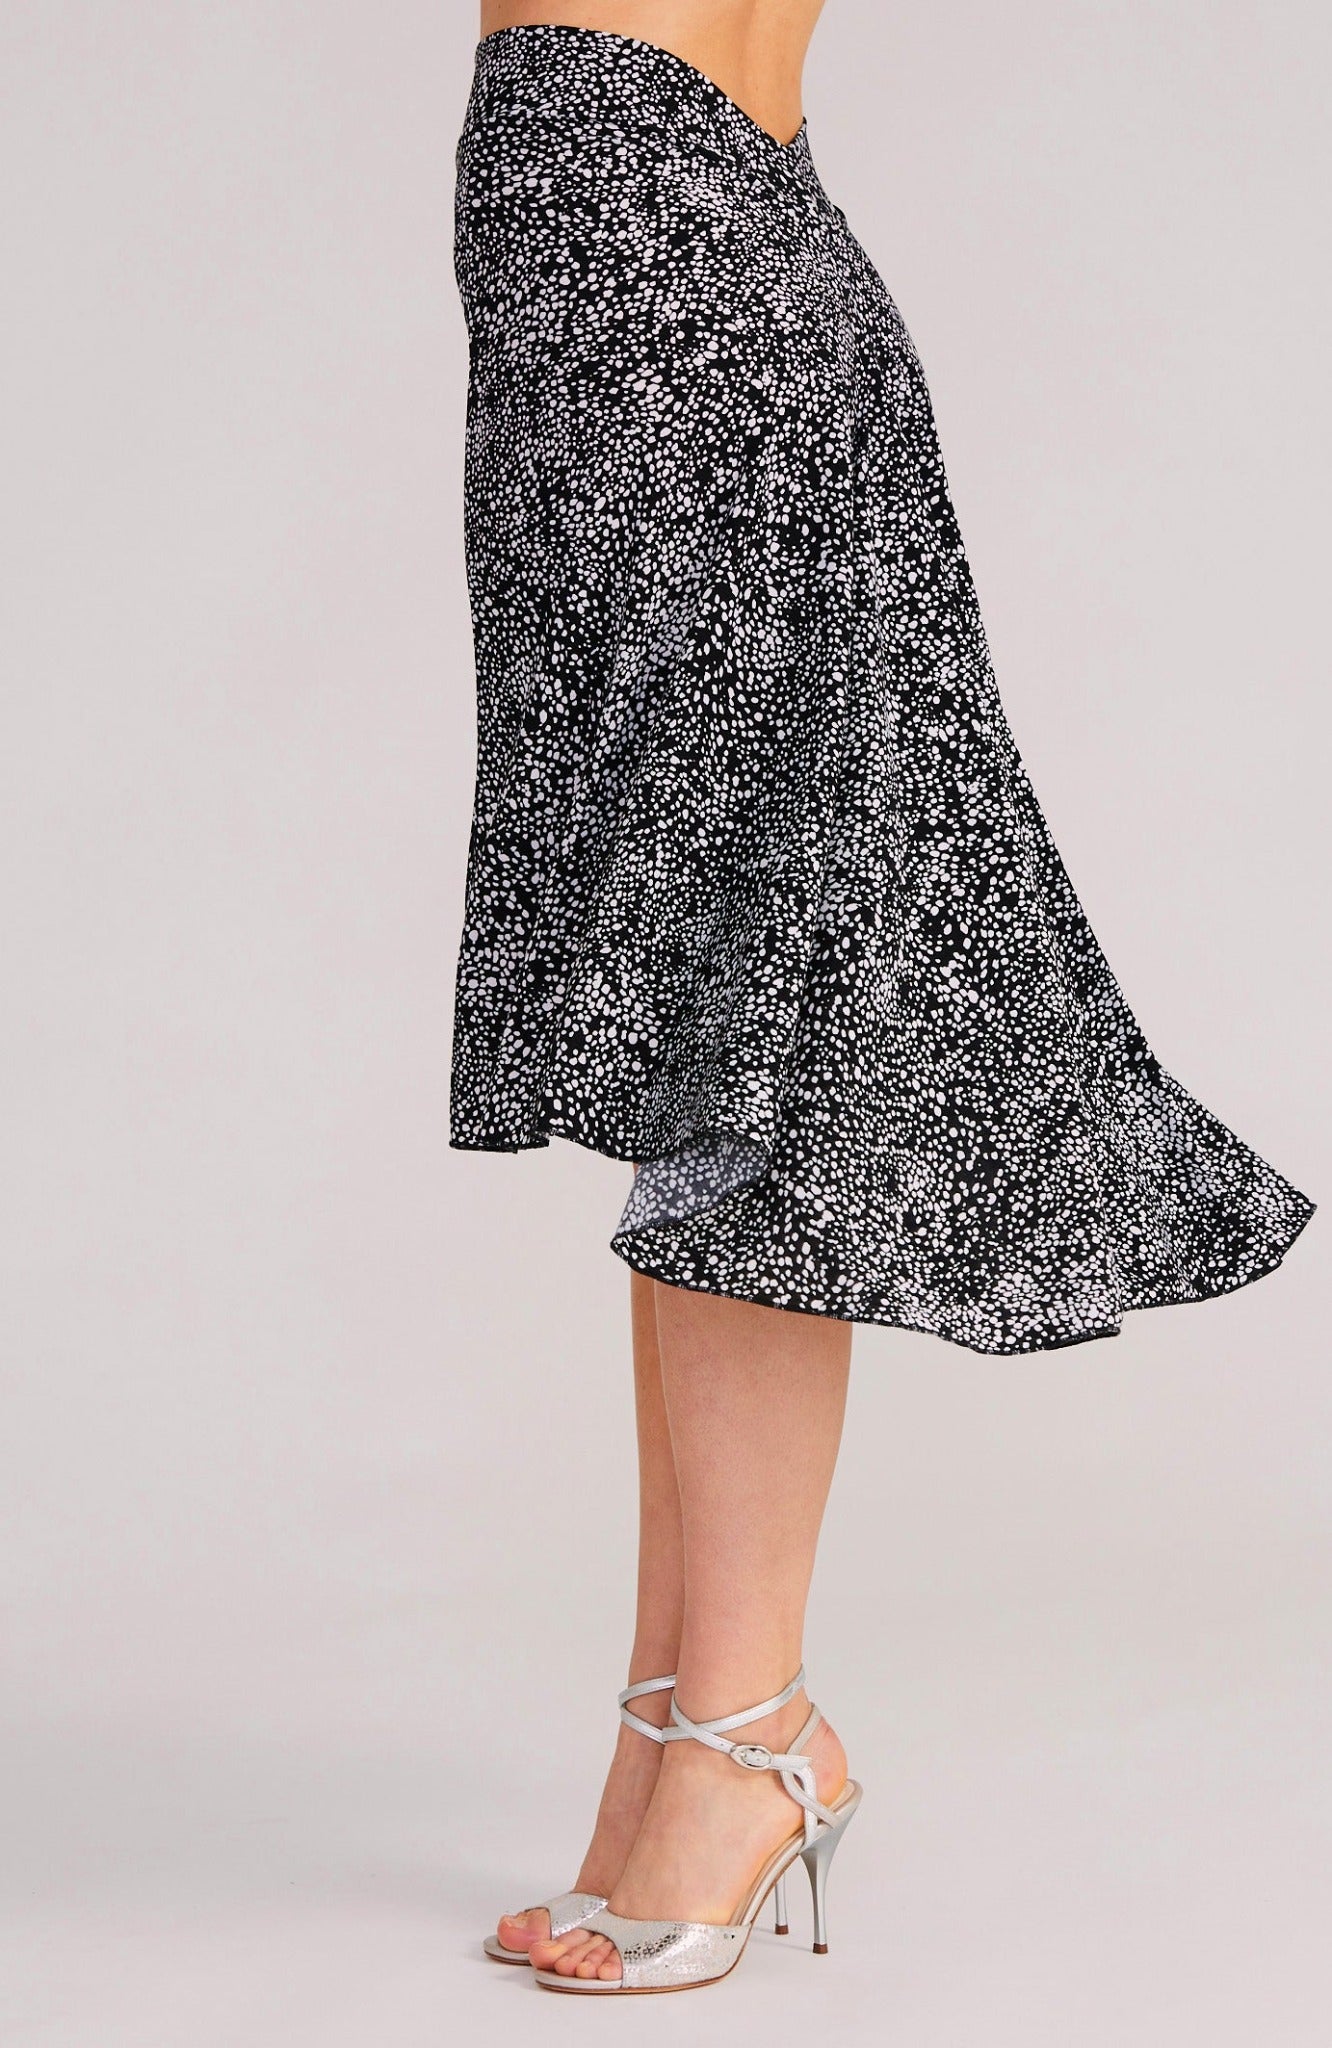 tango skirt in black and white dots